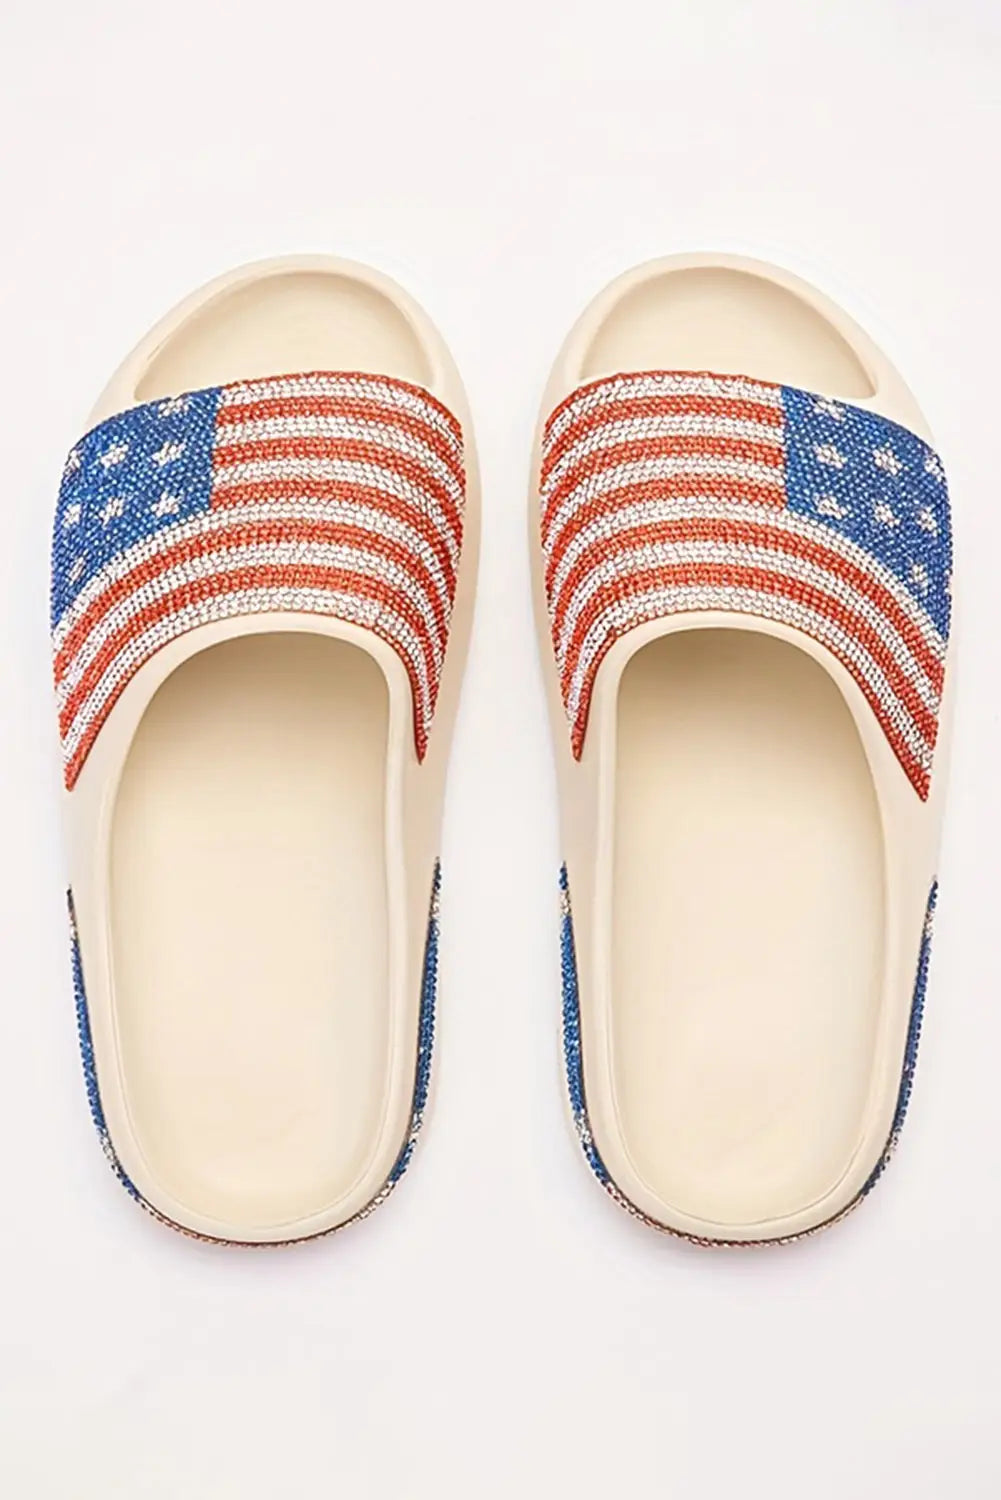 White rhinestone american flag thick sole slippers - shoes & bags/slippers